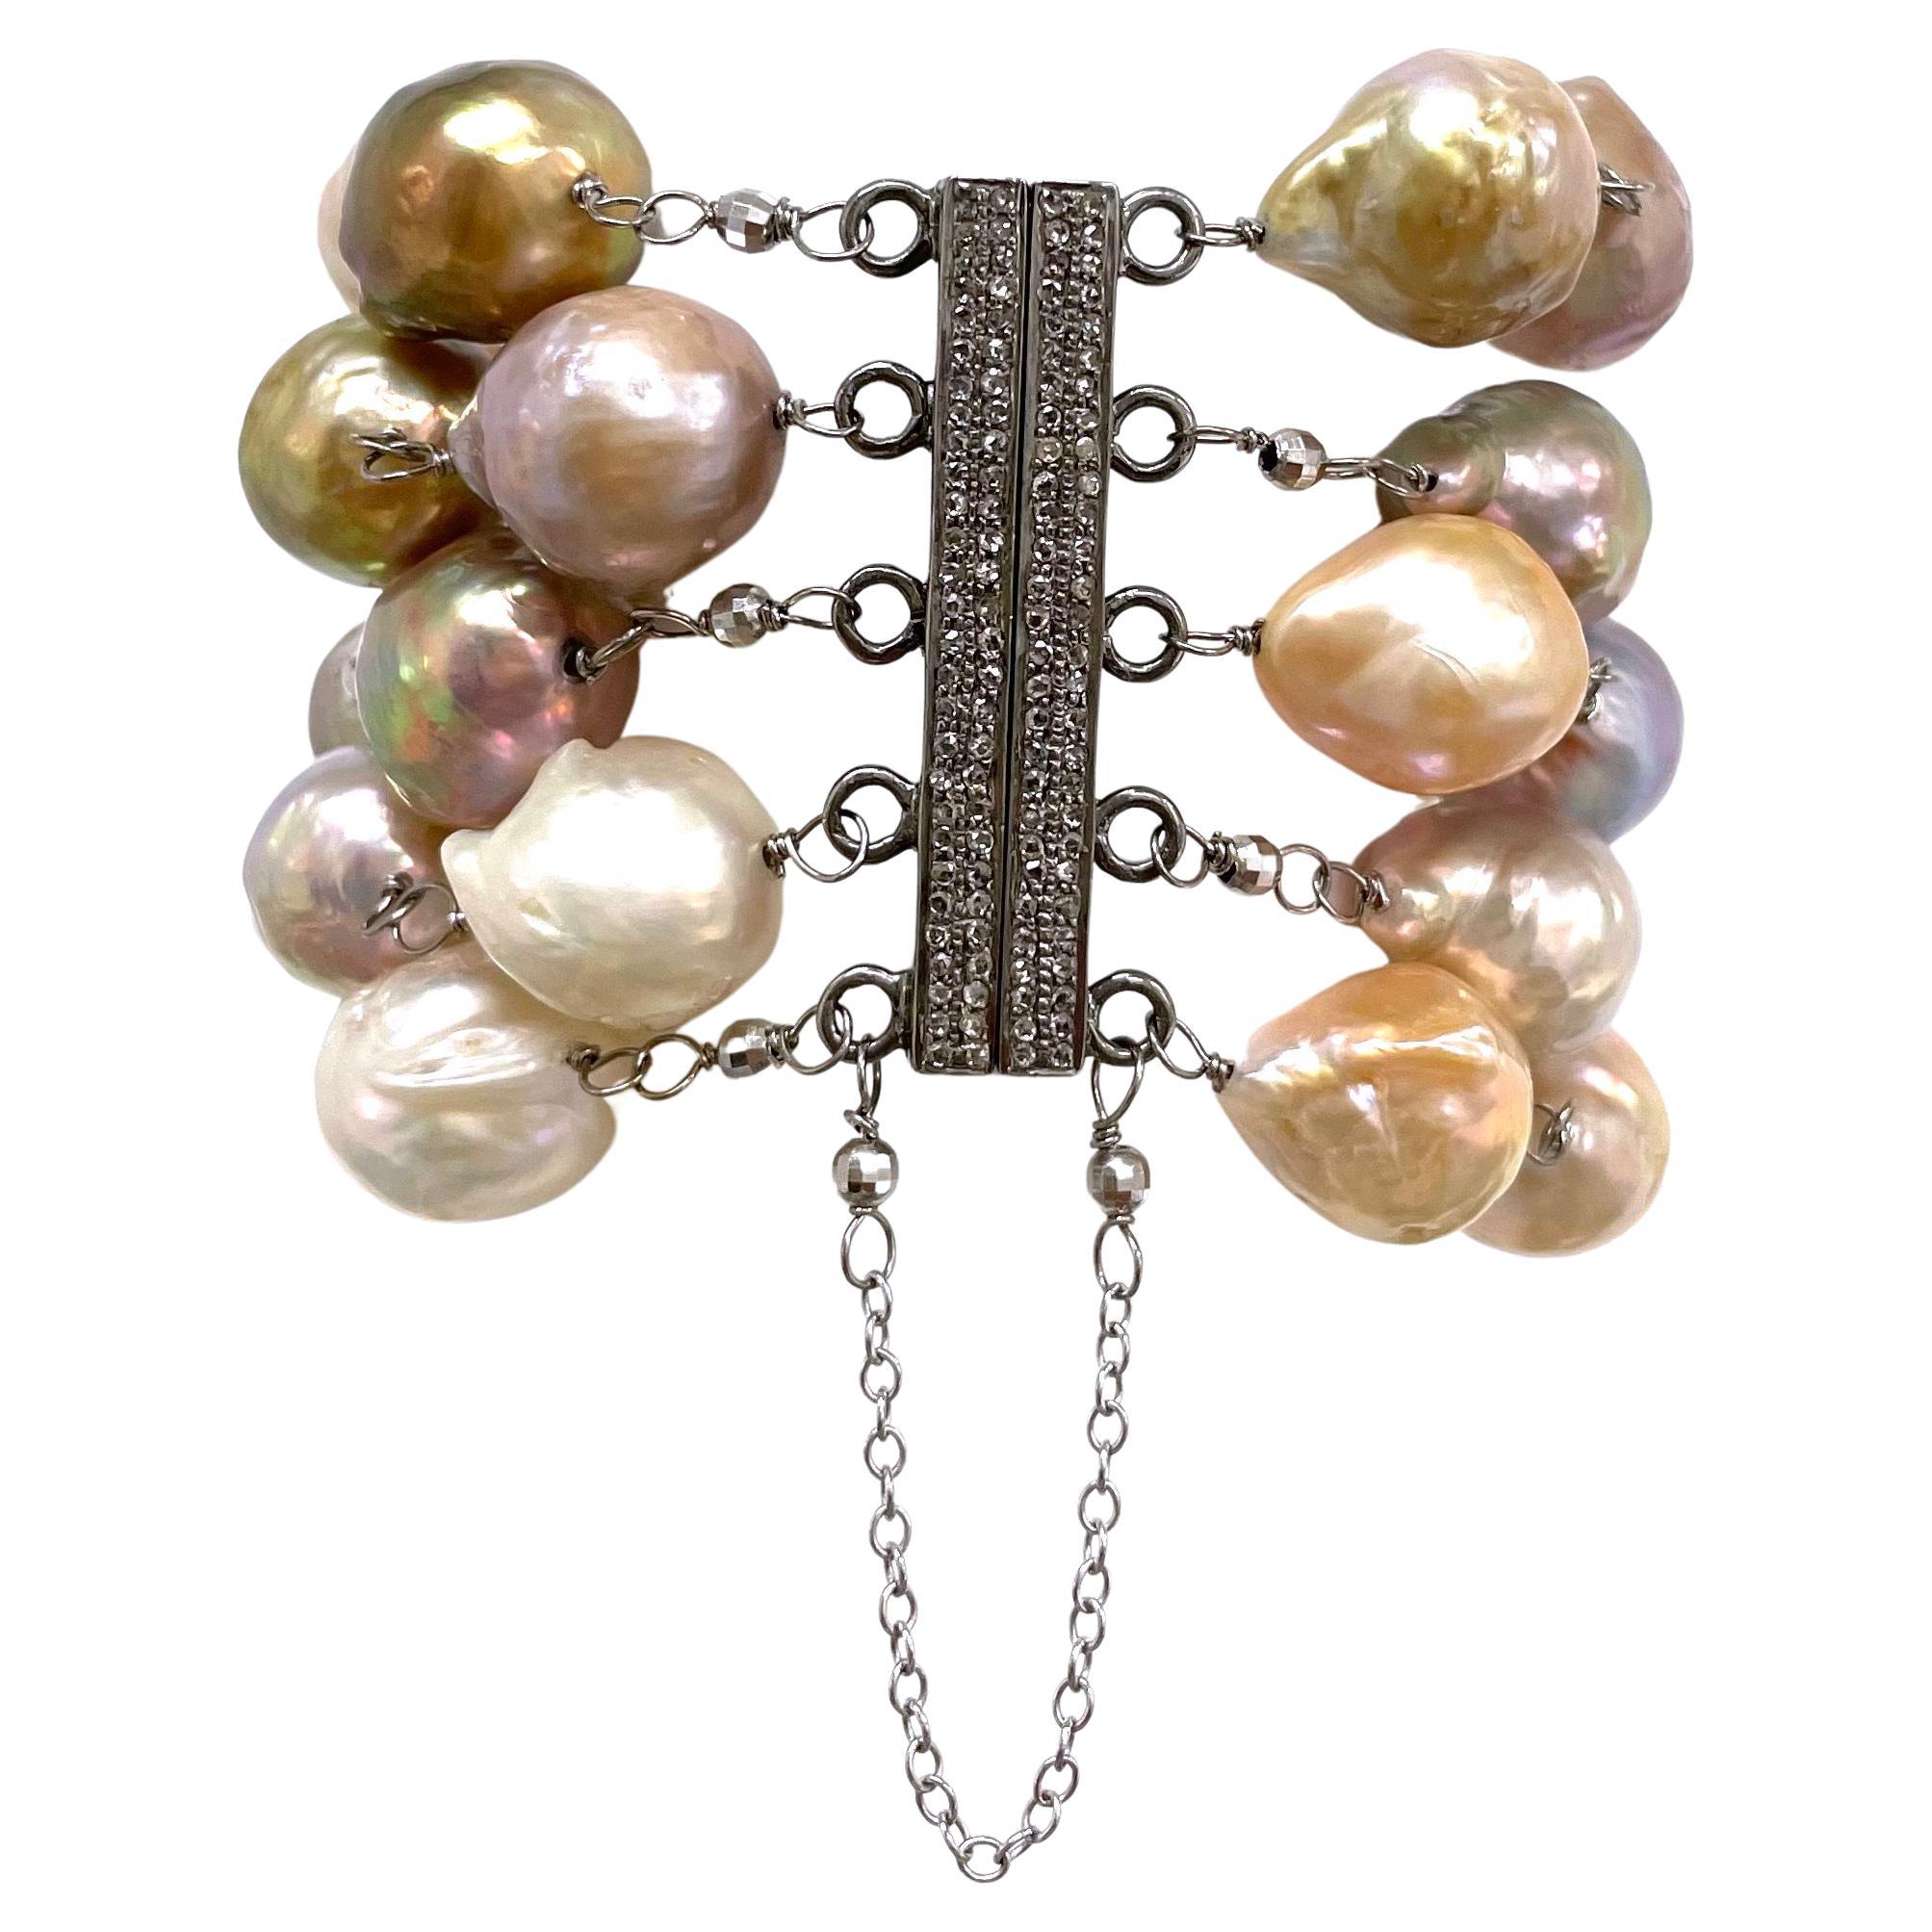 Description
Dramatic, 5 strand large baroque freshwater pearls in all shades of natural pink. The bracelet is embellished with 14k white gold faceted ball accents and a stunning easy to use pave diamond magnetic clasp secured with a safety chain.   